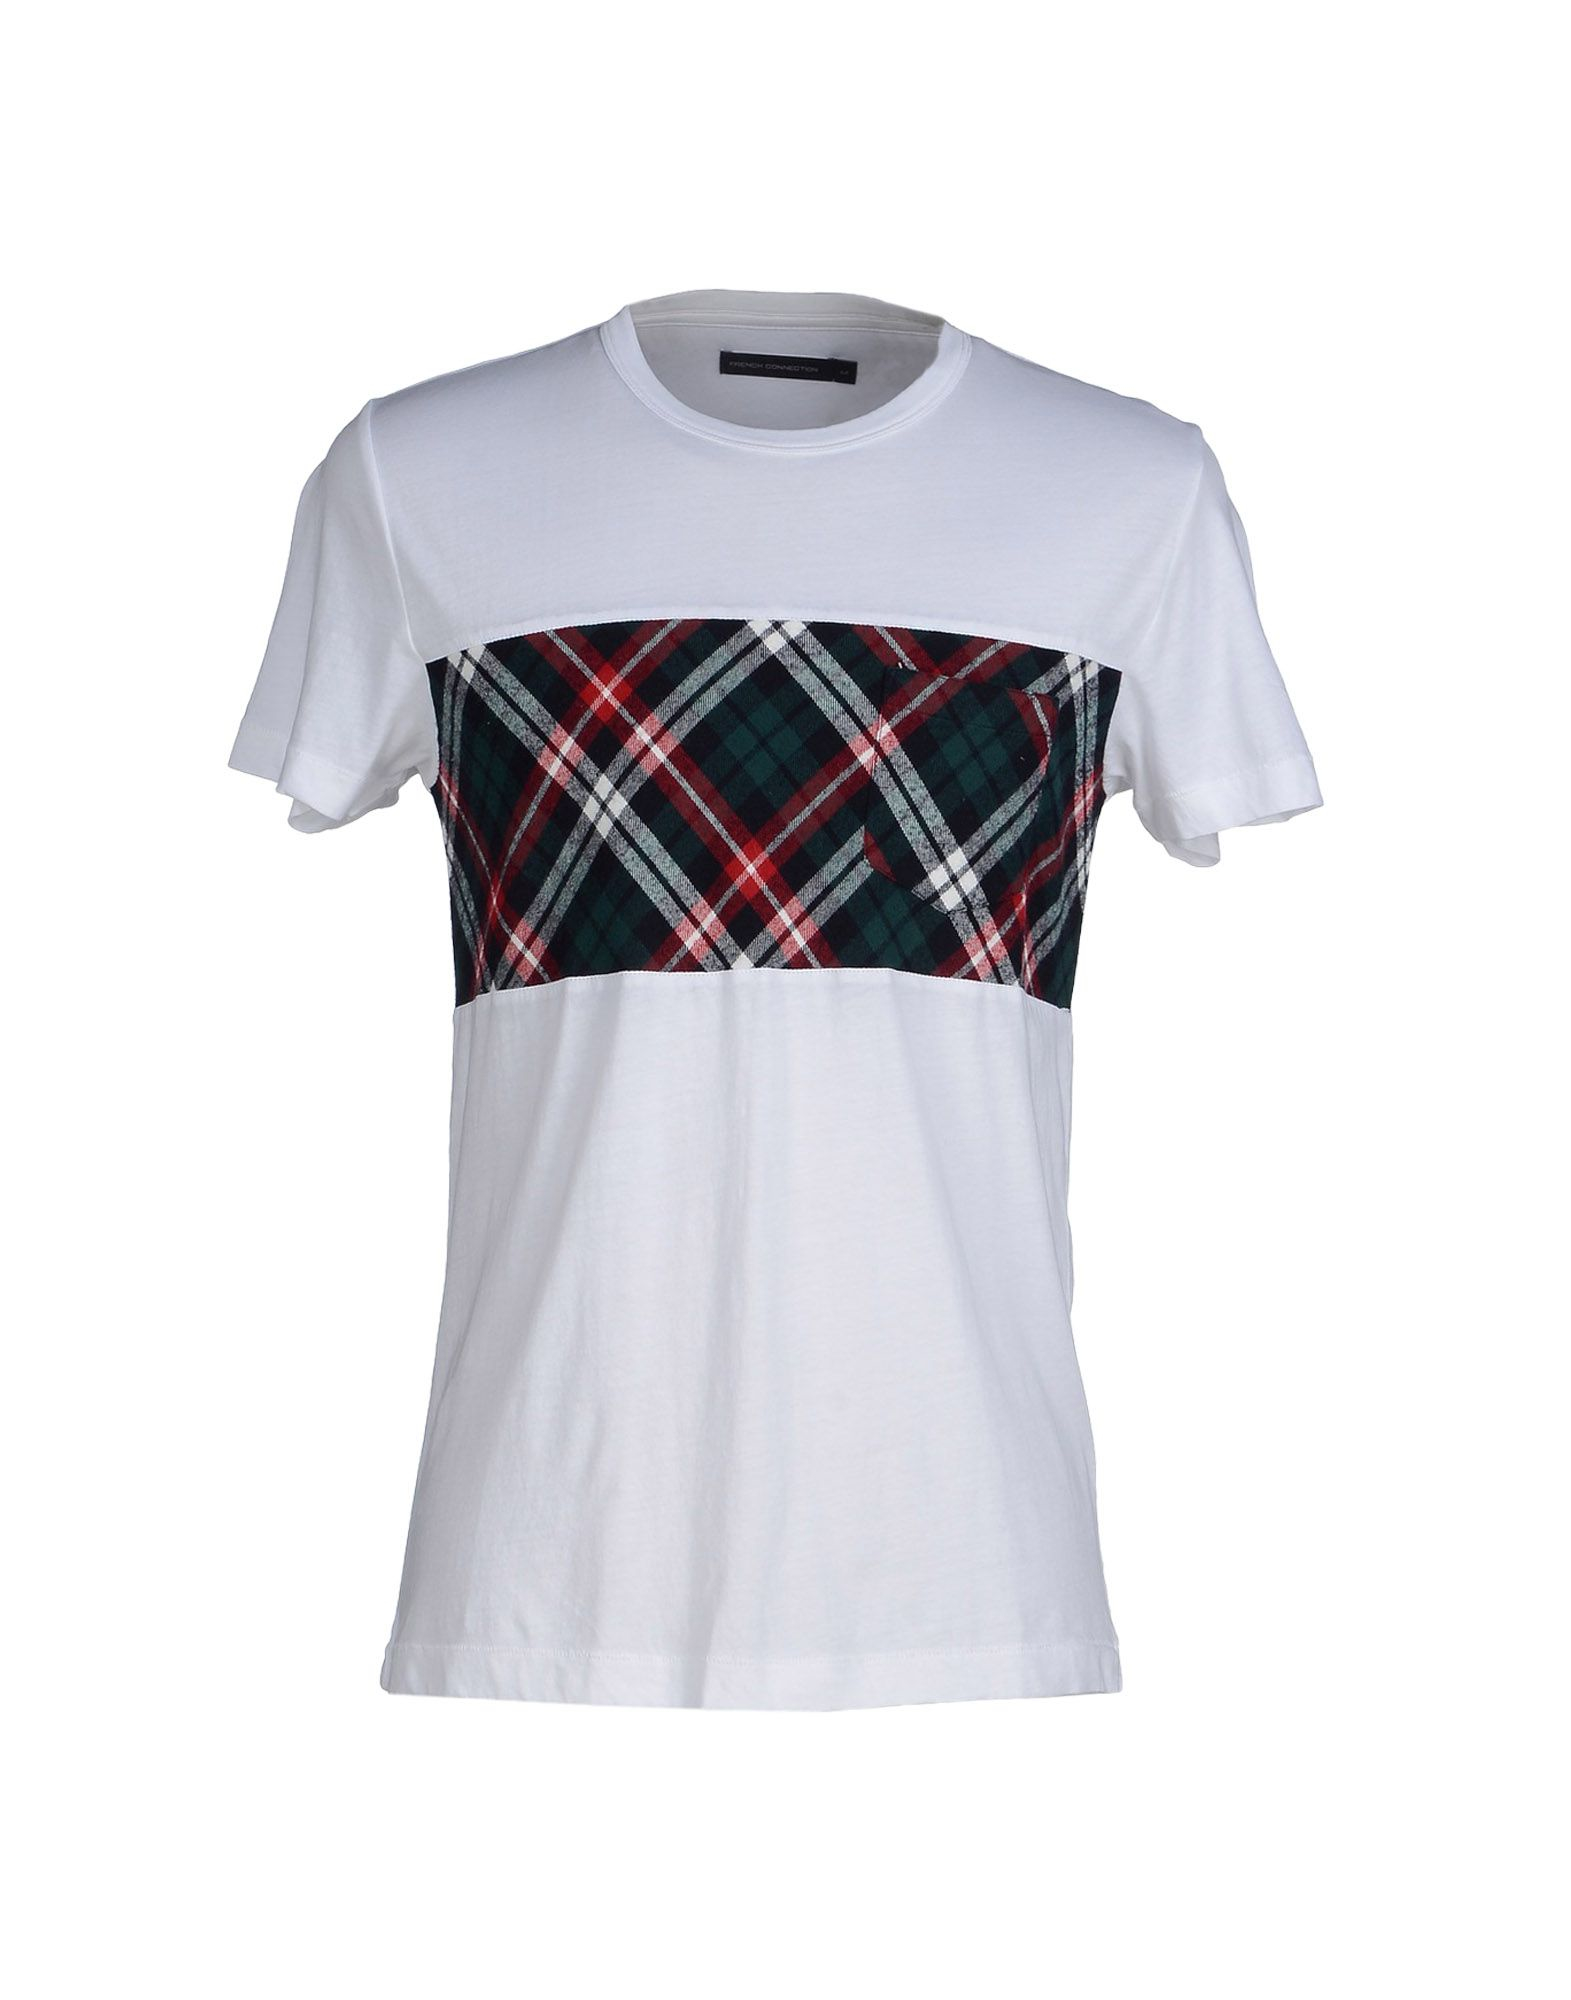 Lyst - French Connection T-shirt in White for Men